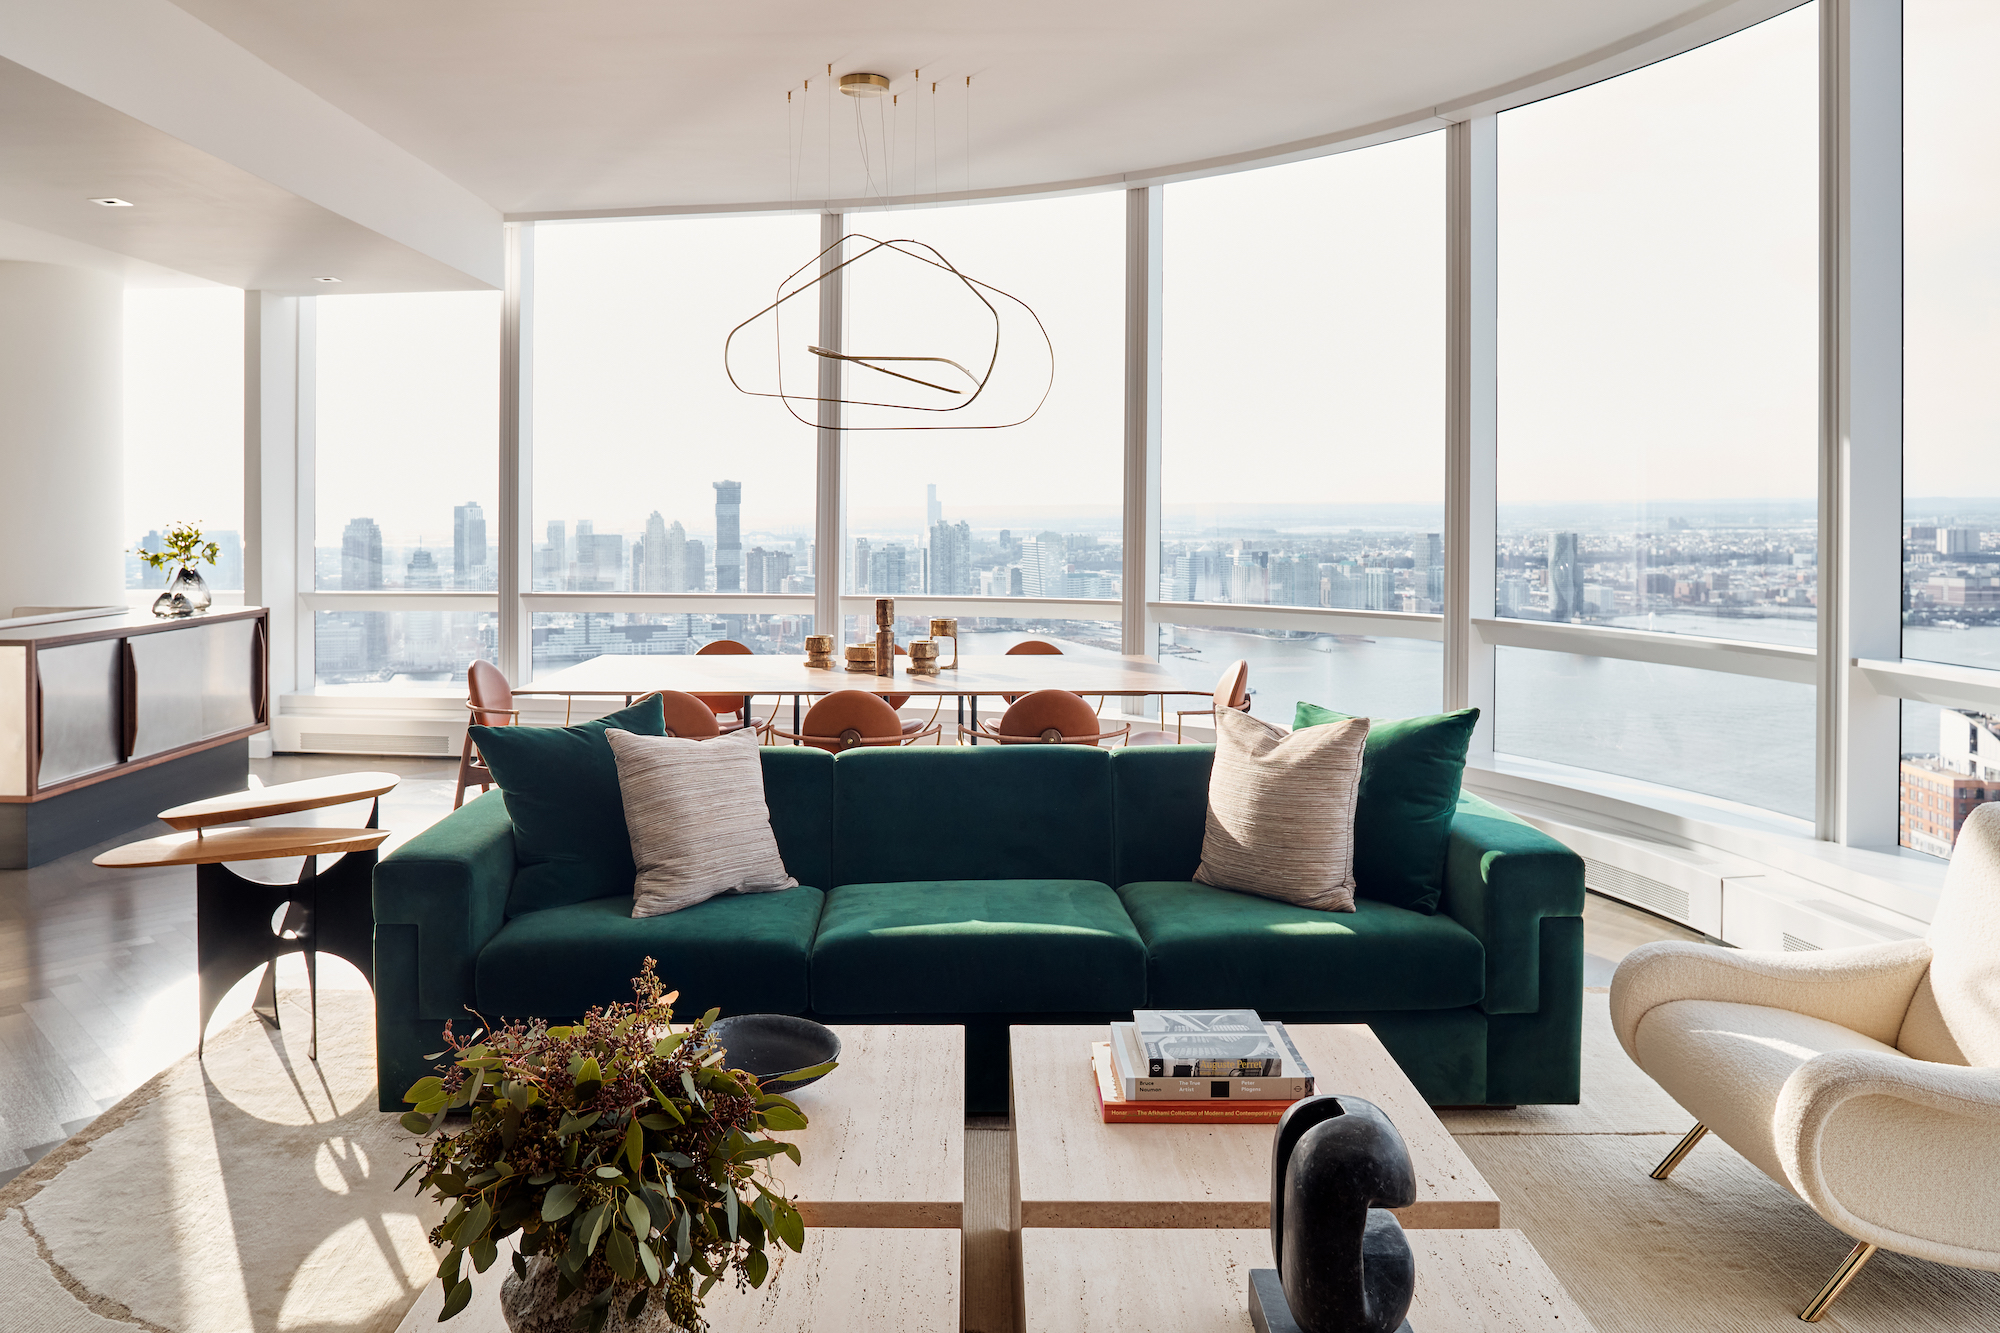 Jewel tones and sculptural lighting are some of the touches Jessica Gersten brought to her Tribeca Pied a Terre project in New York - Effect Magazine